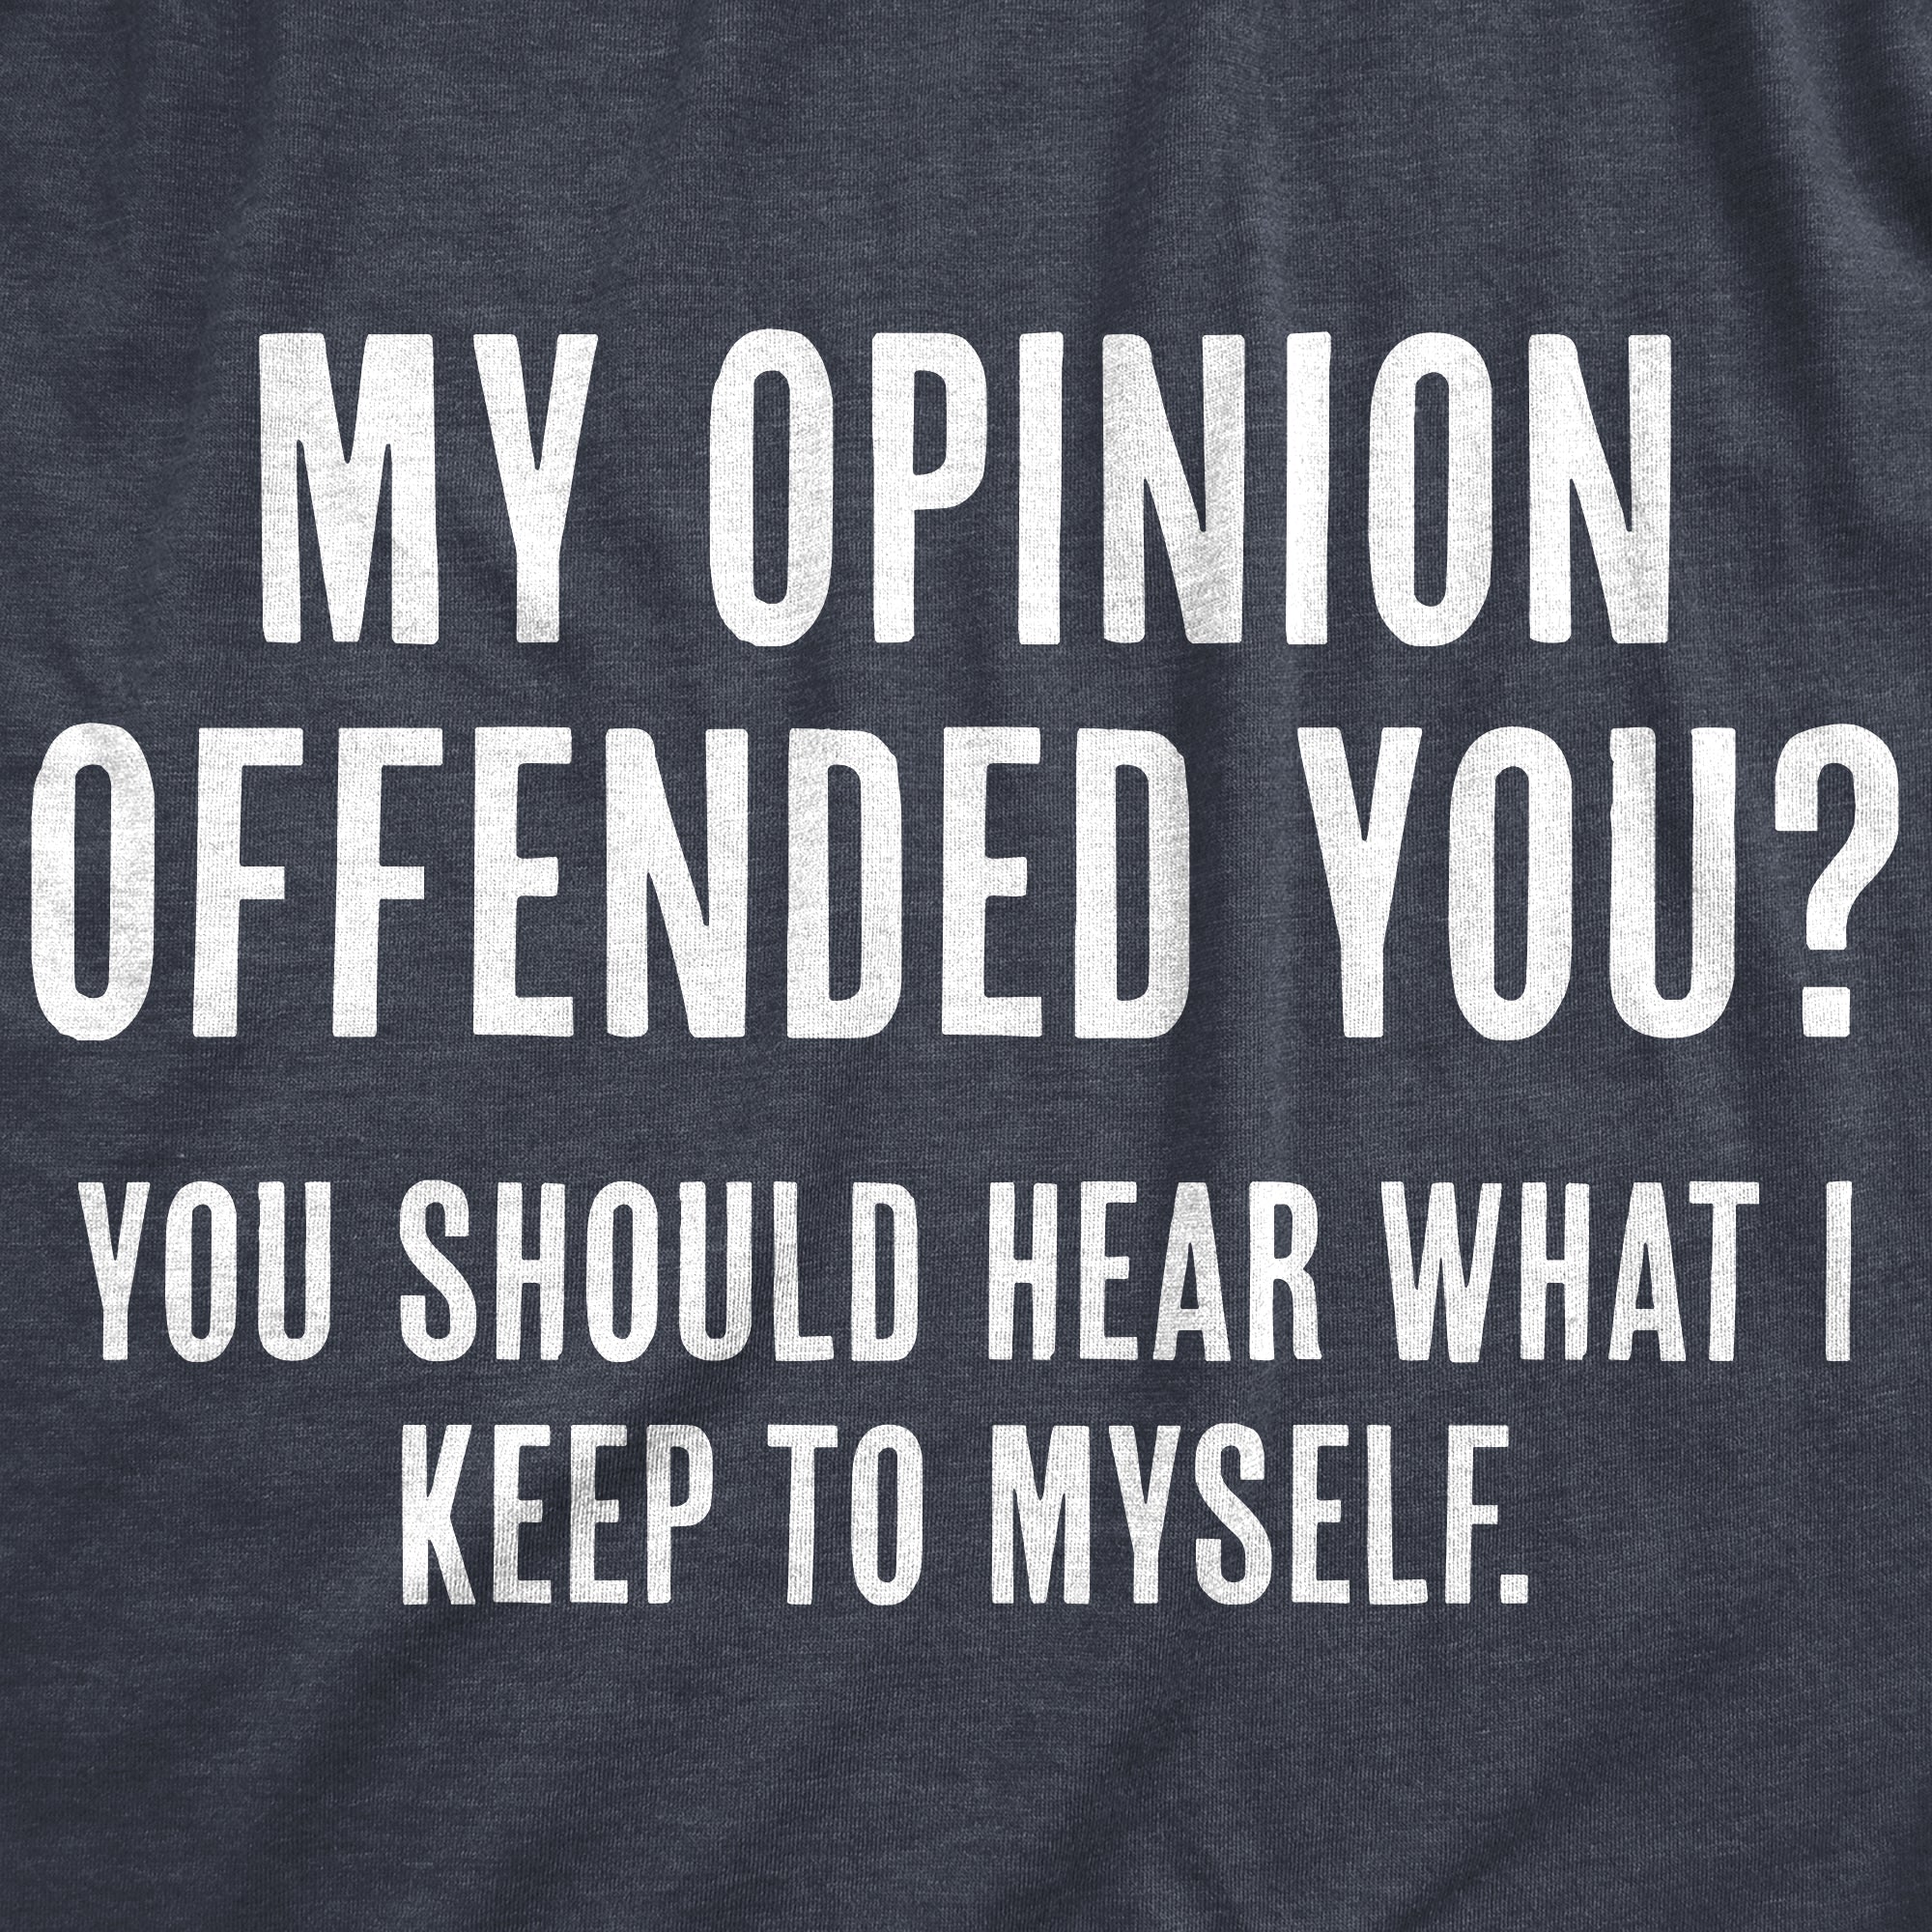 Funny Heather Navy - Opinion Offended My Opinion Offended You? You Should Hear What I Keep To Myself Womens T Shirt Nerdy Sarcastic Tee